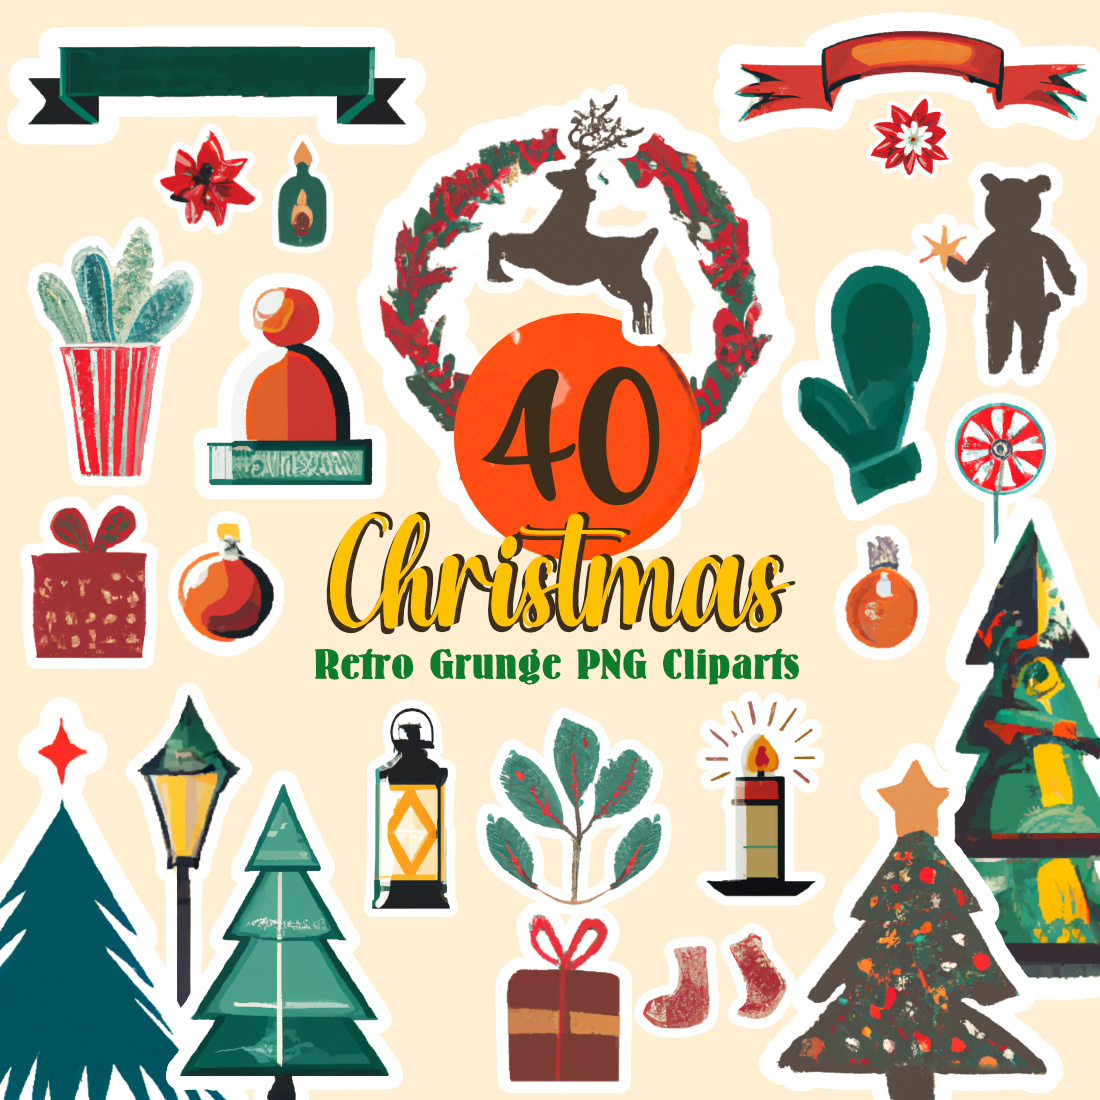 Christmas Retro Grunge PNG Clipart cover image.